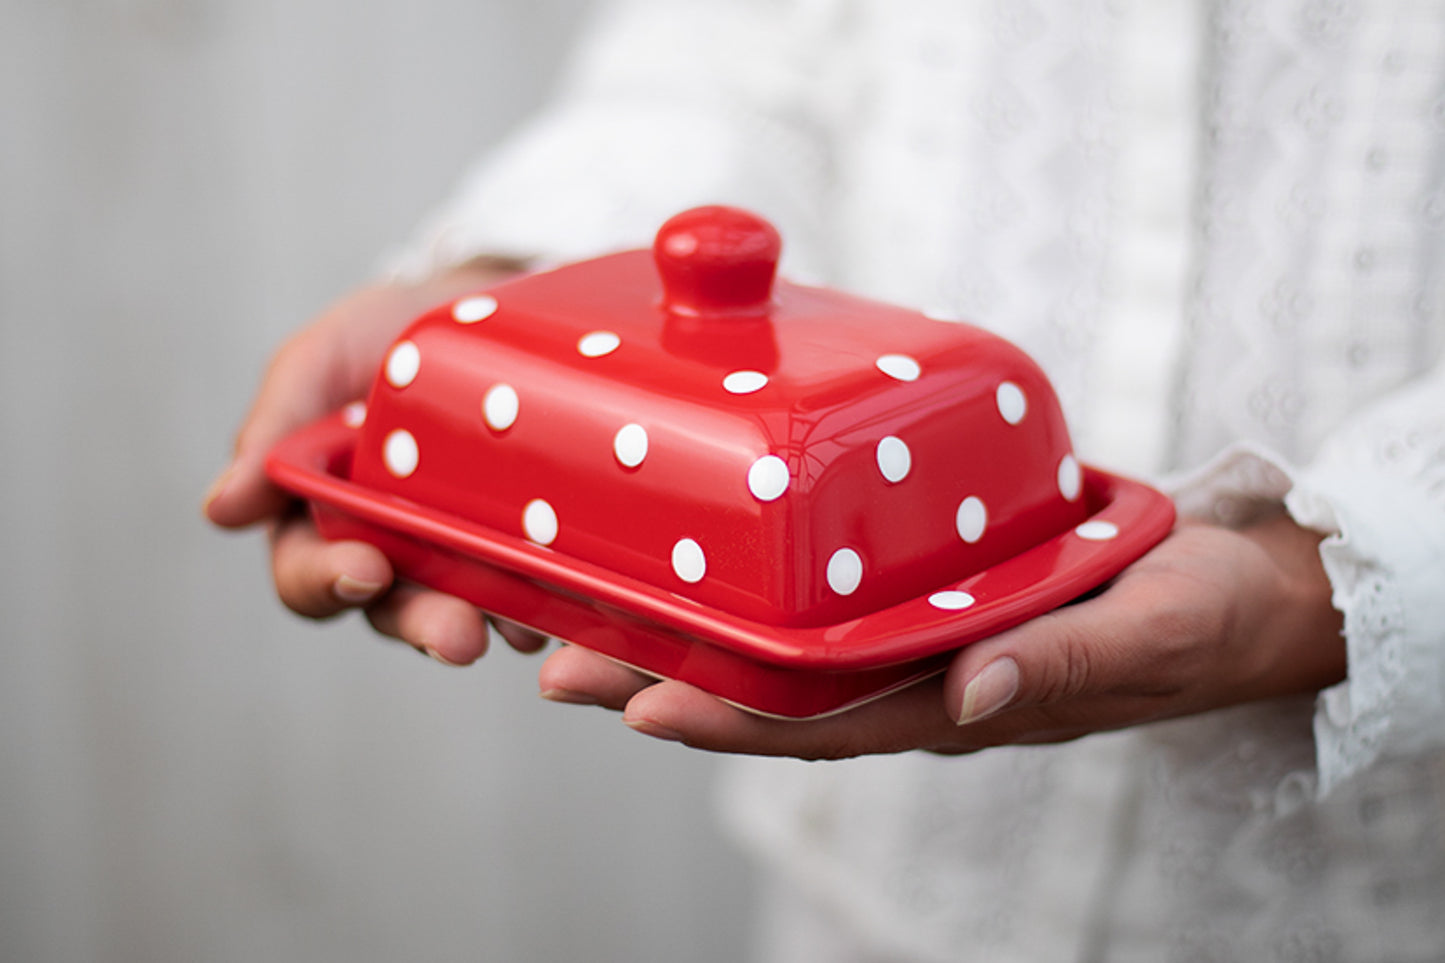 Red And White Polka Dot Spotty Handmade Hand Painted Ceramic Butter Dish With Lid